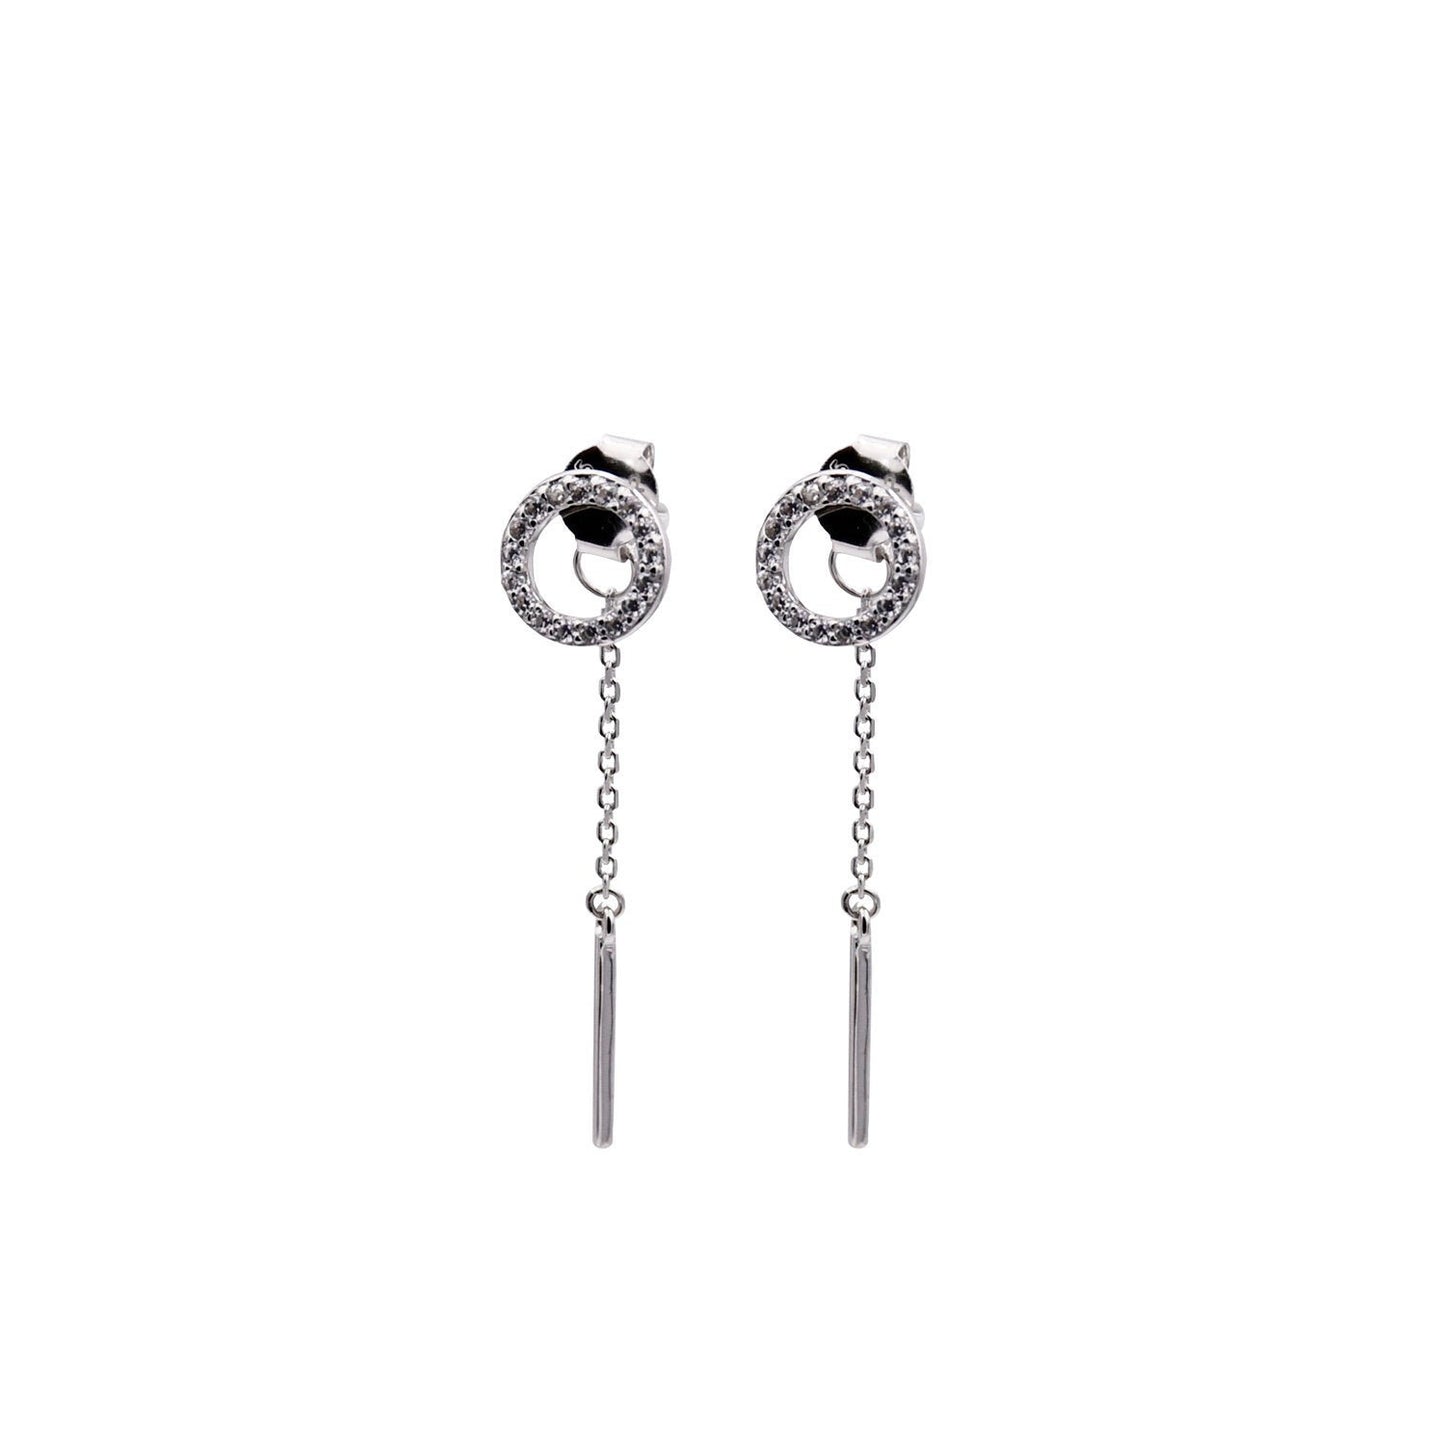 Rhodium Plated Sterling Silver Earrings with a Long Chain and White Zirconias